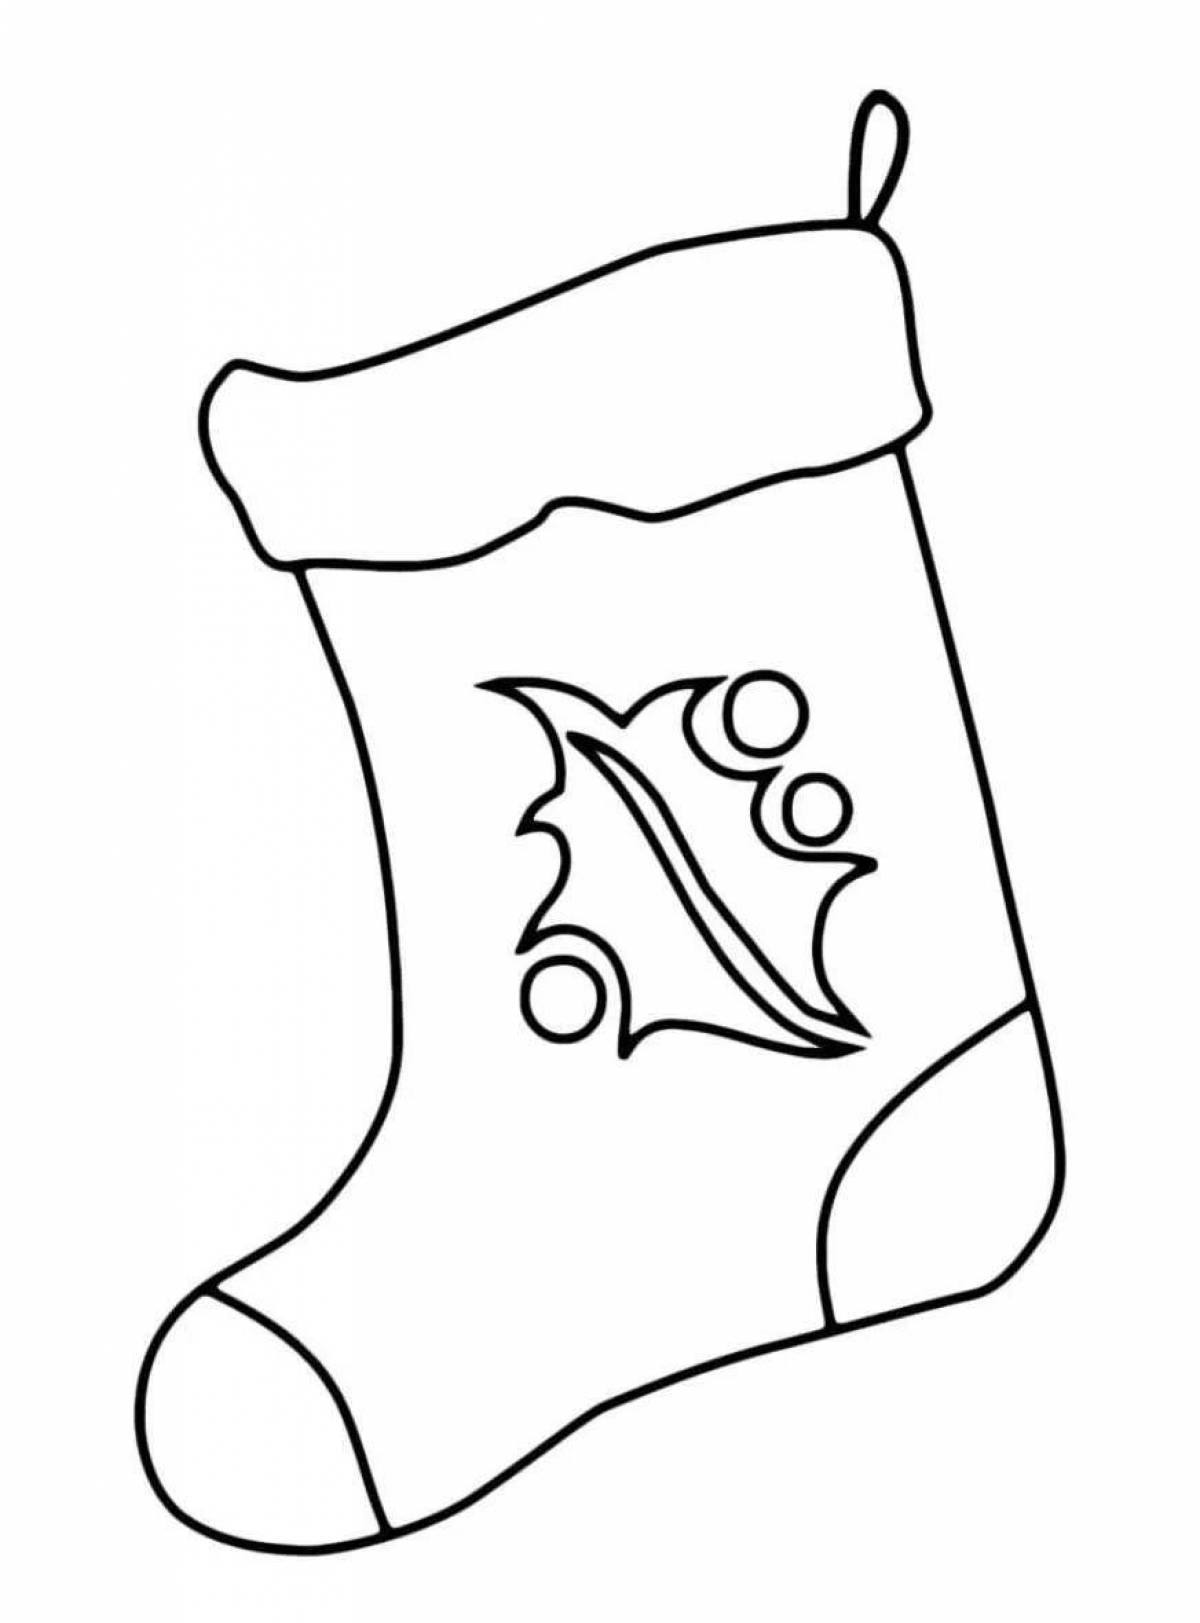 Coloring page funny boots pattern